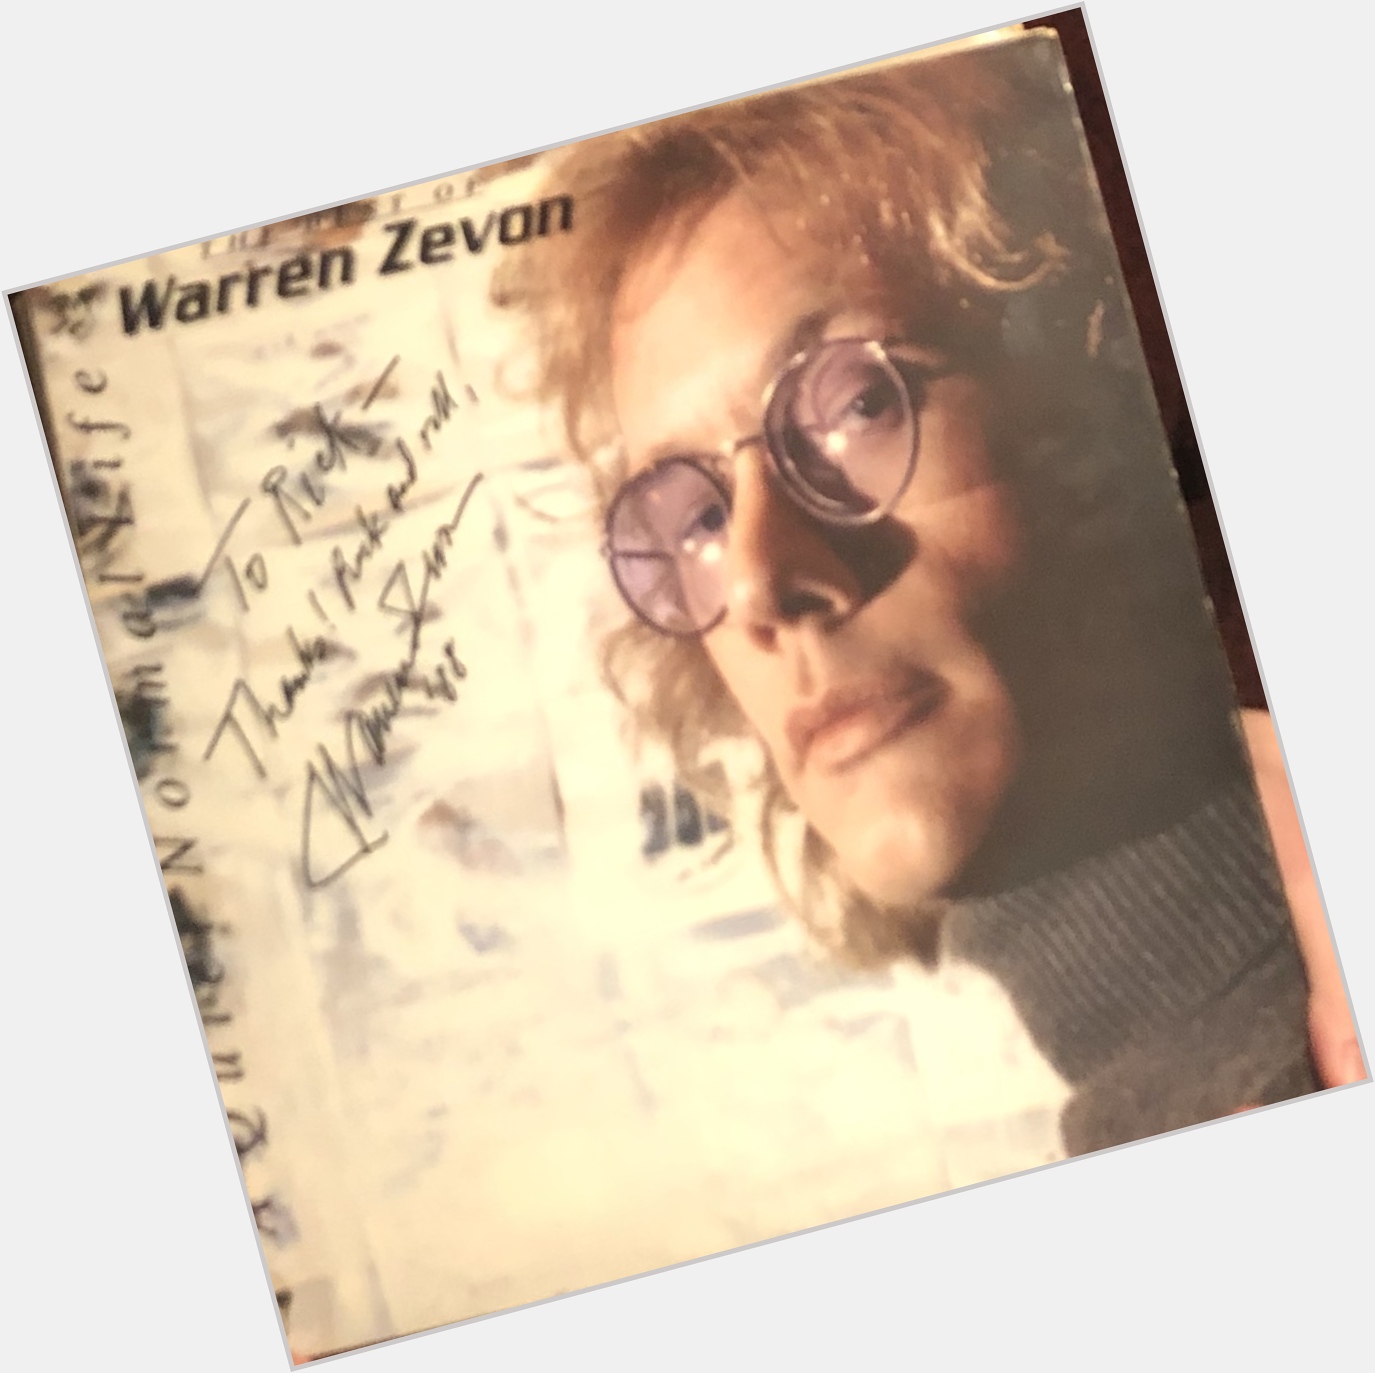 Happy birthday Warren Zevon. Still listen to his music all the time. This is one of my prized possessions. 